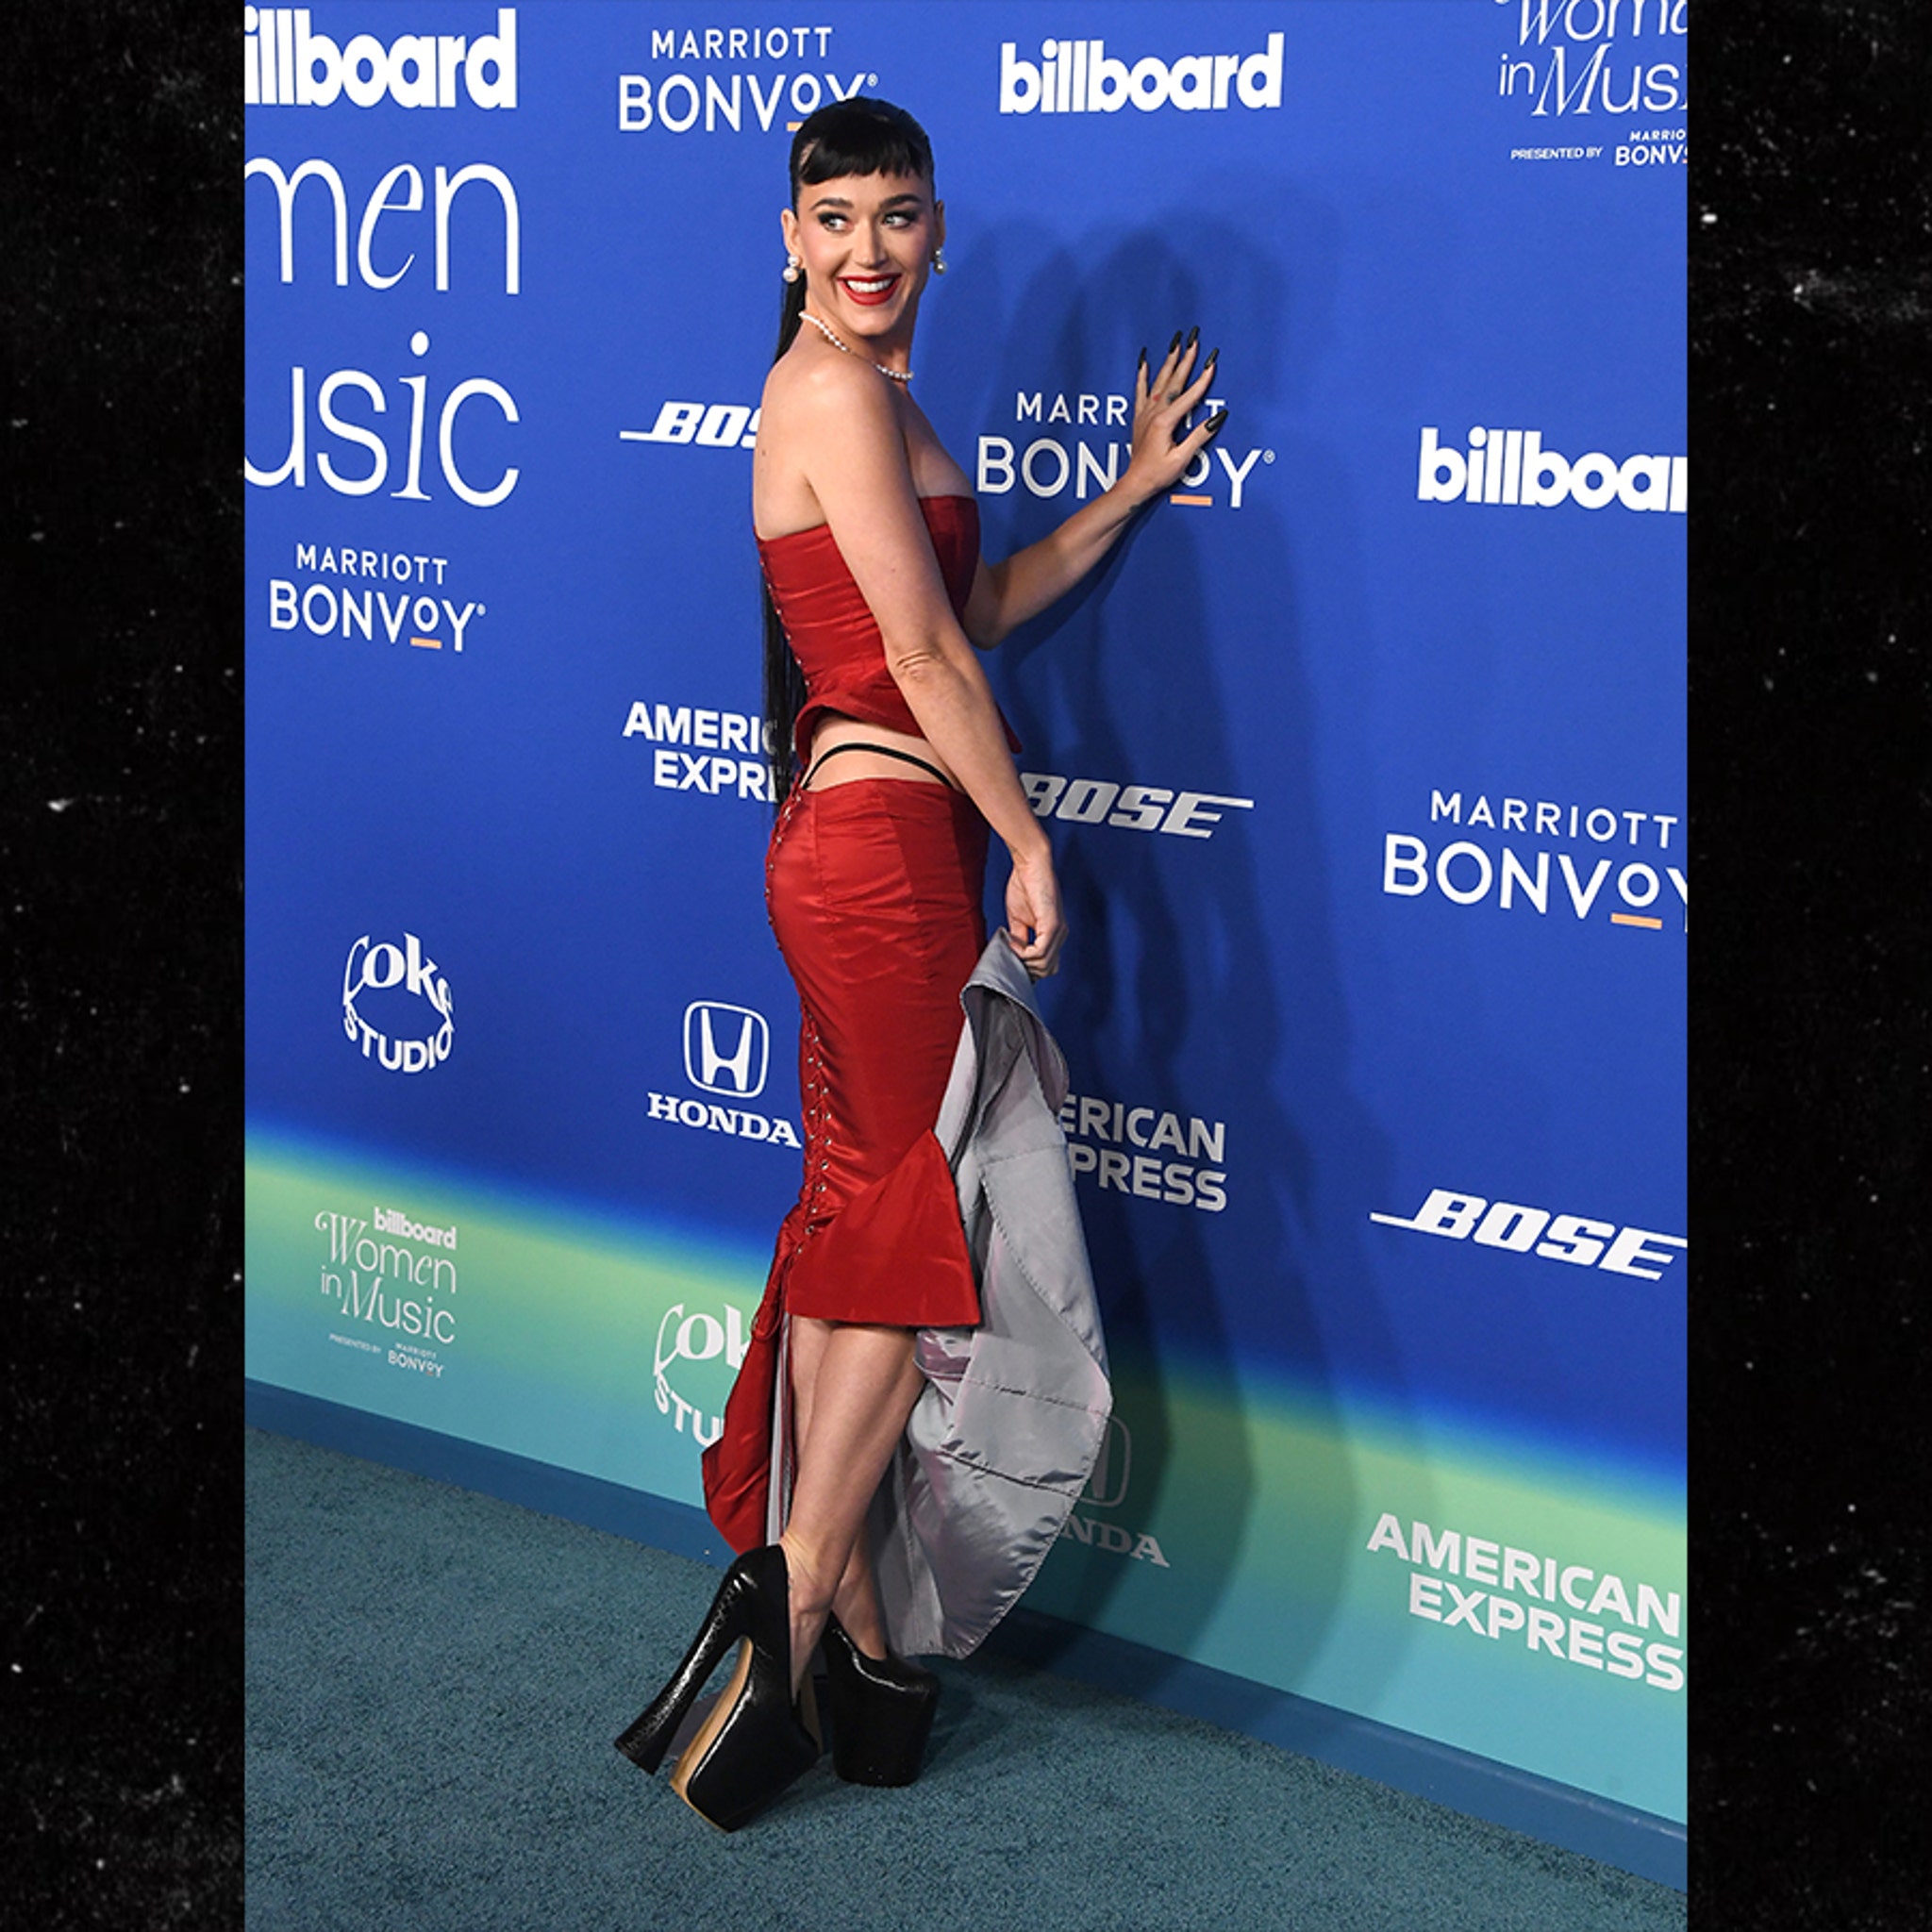 Katy Perry Wears Sexy Laced-Up Red Dress, Exposes Butt in G-String